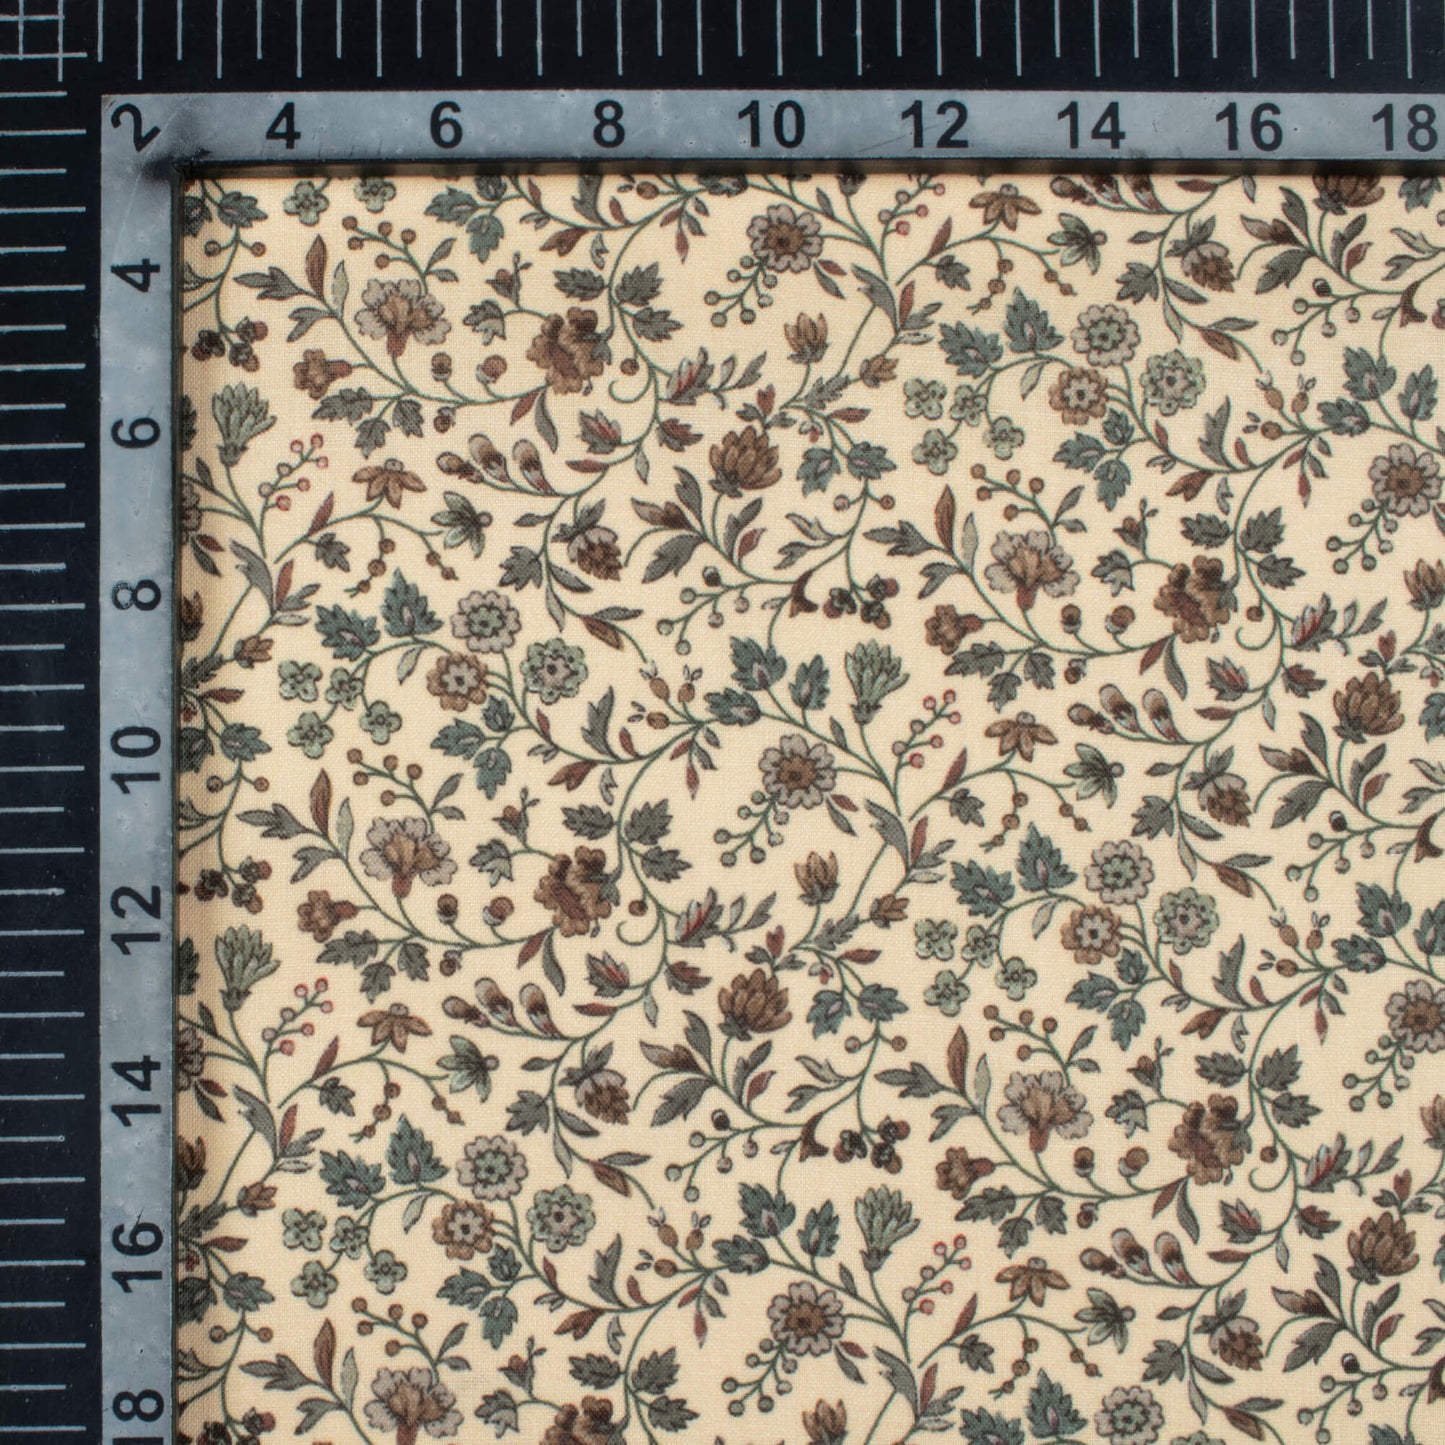 Pastel Peach And Dark Brown Floral Pattern Digital Print Poly Cambric Fabric